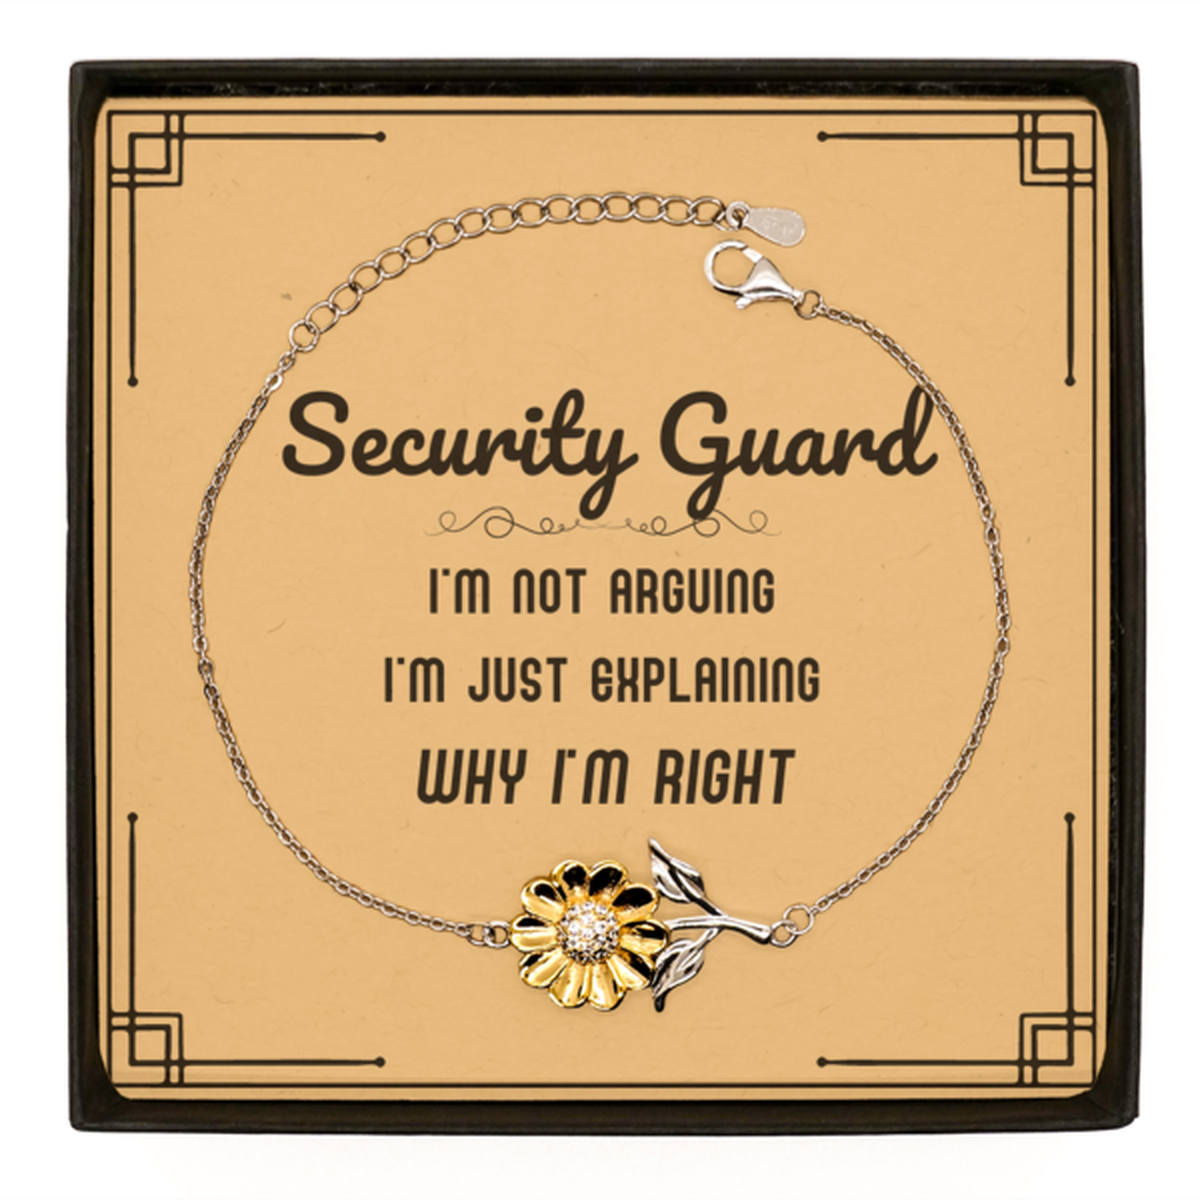 Security Guard I'm not Arguing. I'm Just Explaining Why I'm RIGHT Sunflower Bracelet, Funny Saying Quote Security Guard Gifts For Security Guard Message Card Graduation Birthday Christmas Gifts for Men Women Coworker